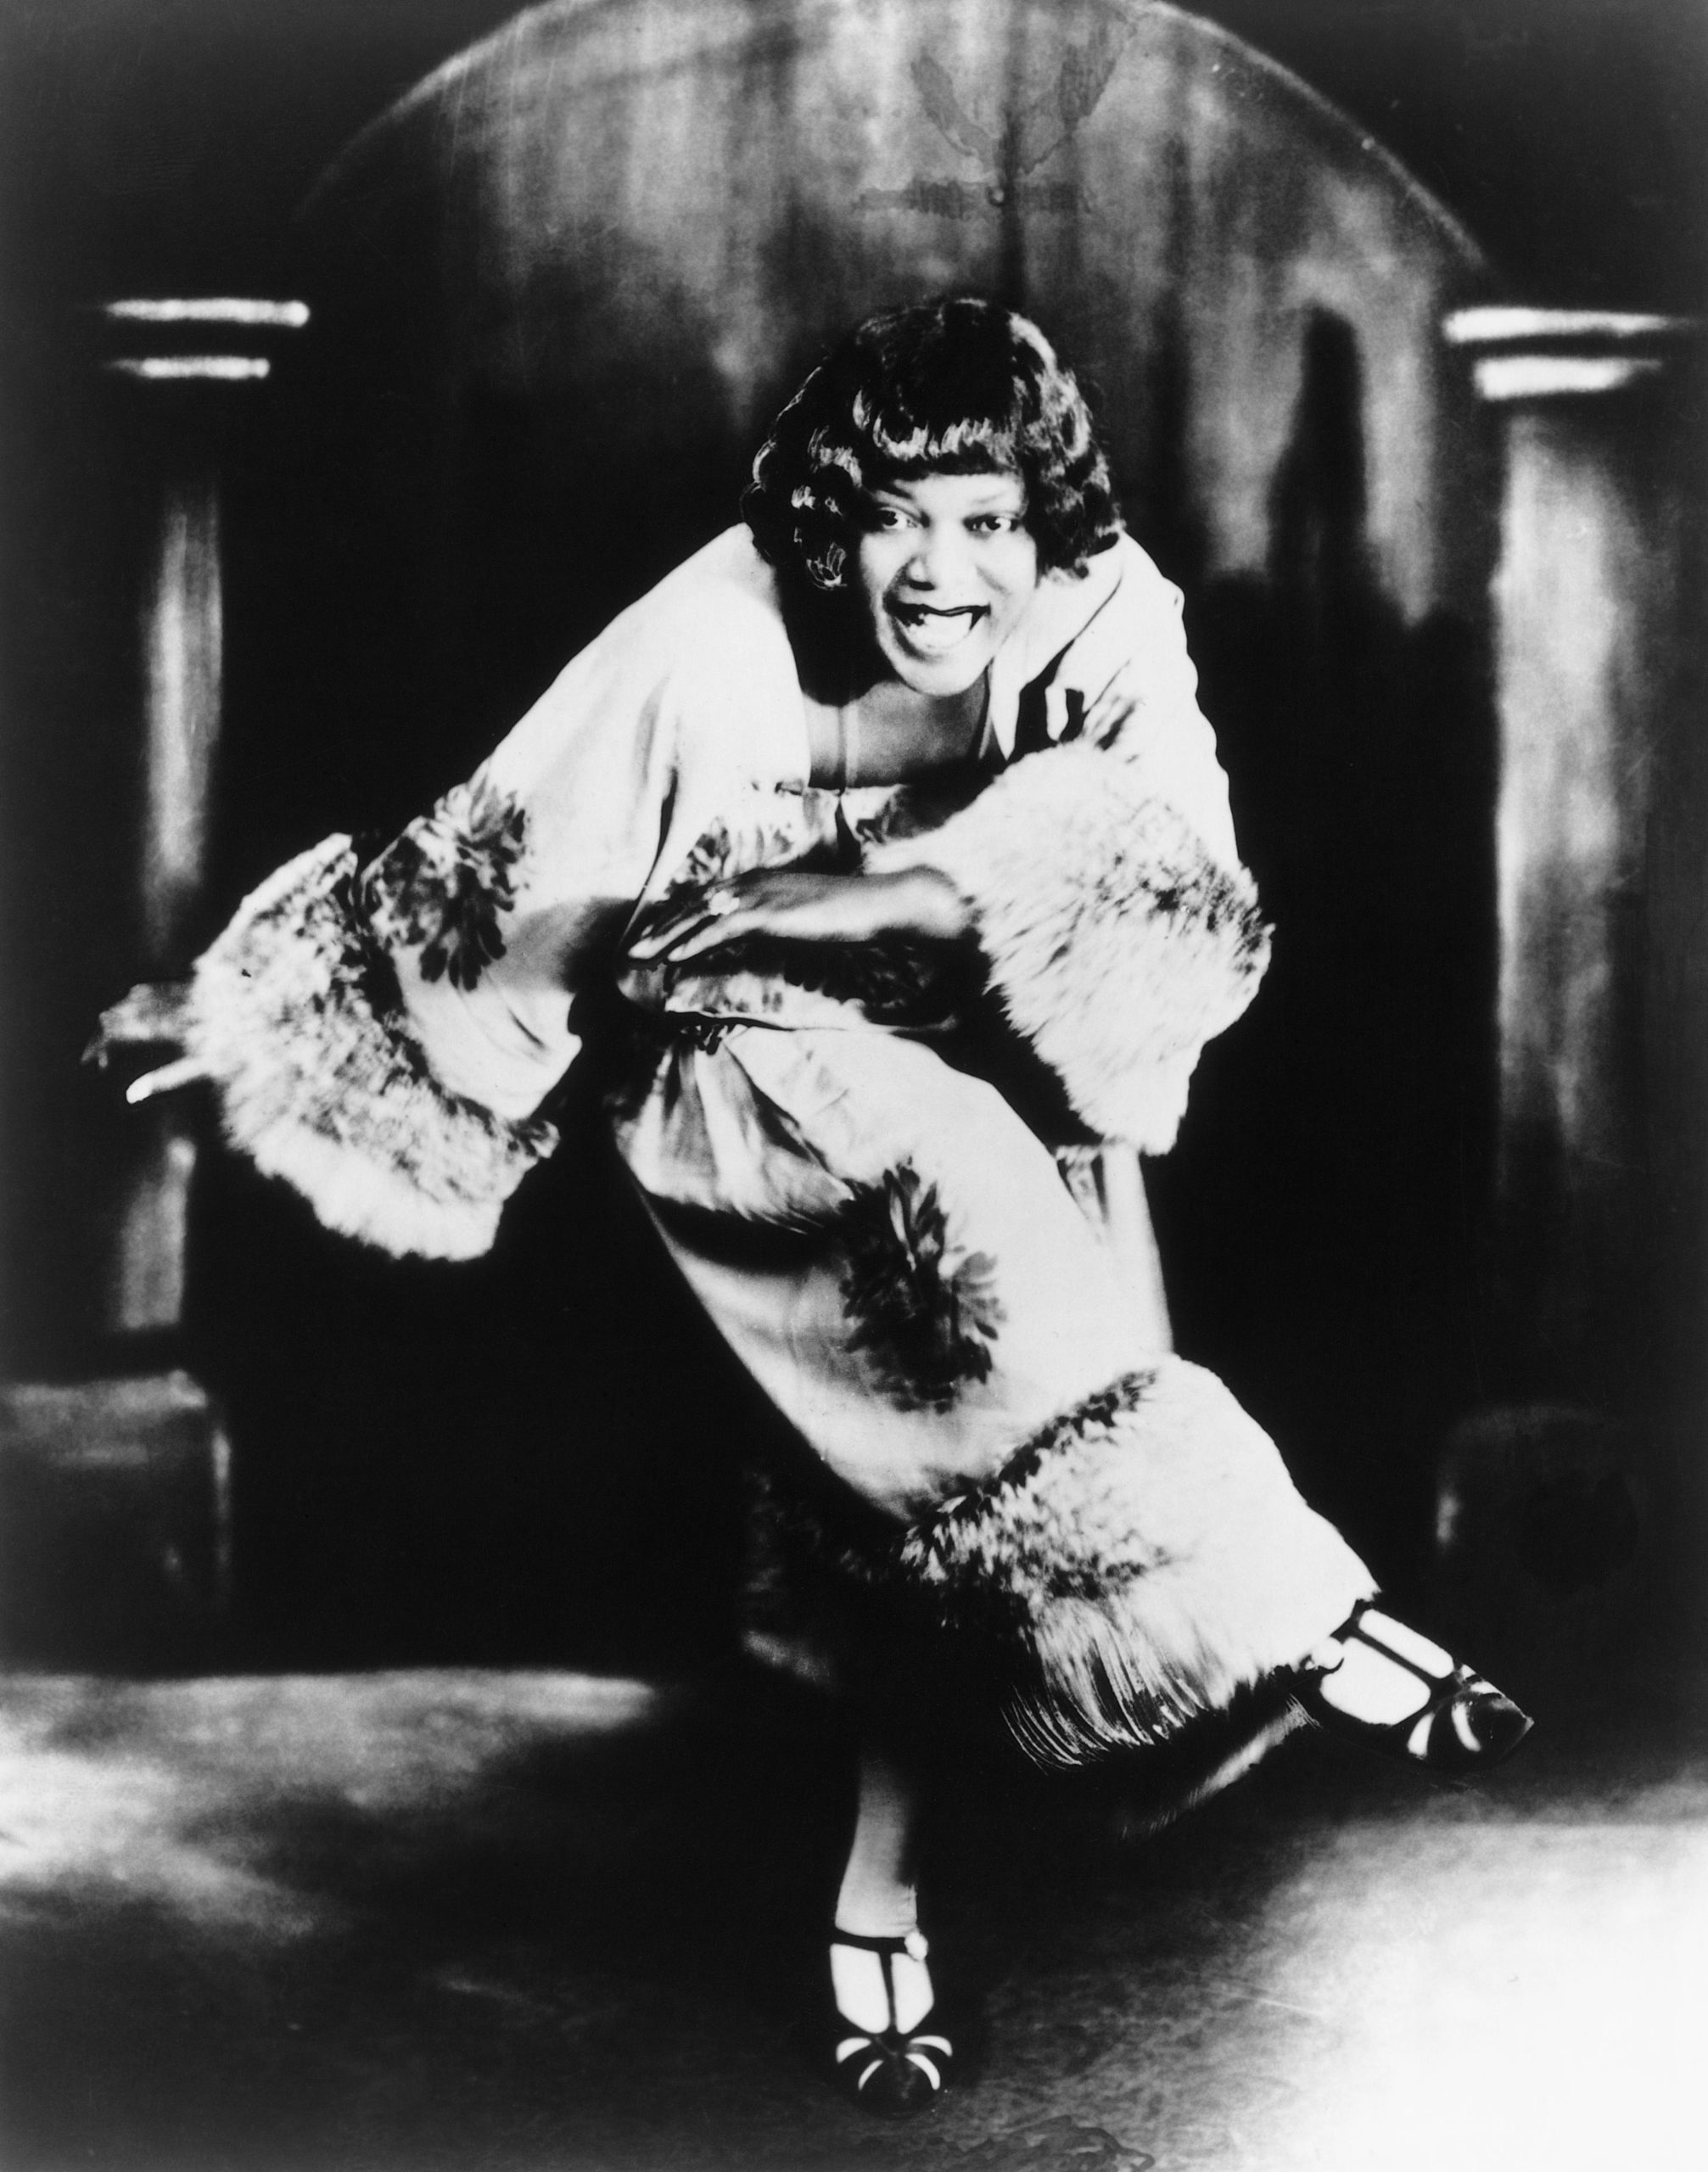 Bessie Smith, a renowned Jazz age singer, dances as she faces the camera straight on, circa 1920